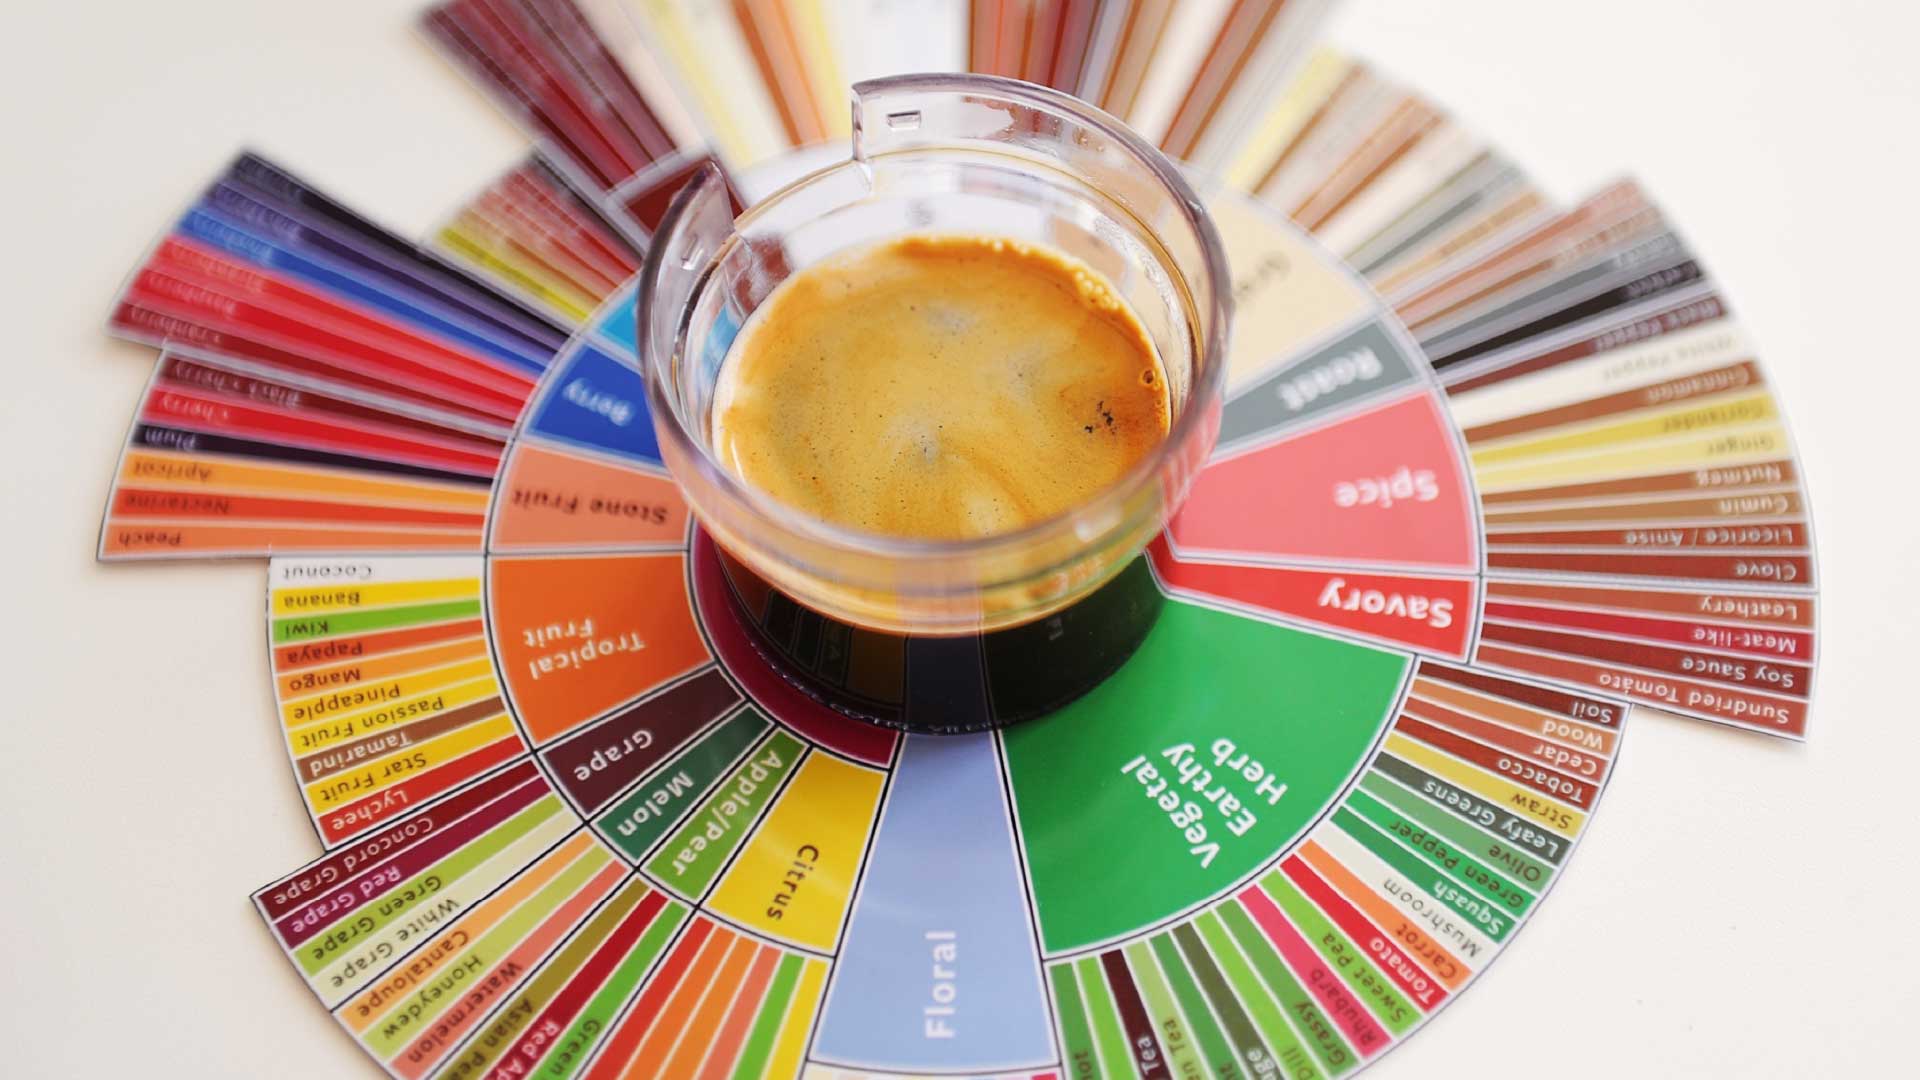 An image of a coffee flavor wheel showing different coffee taste notes and a cup of coffee in the middle.